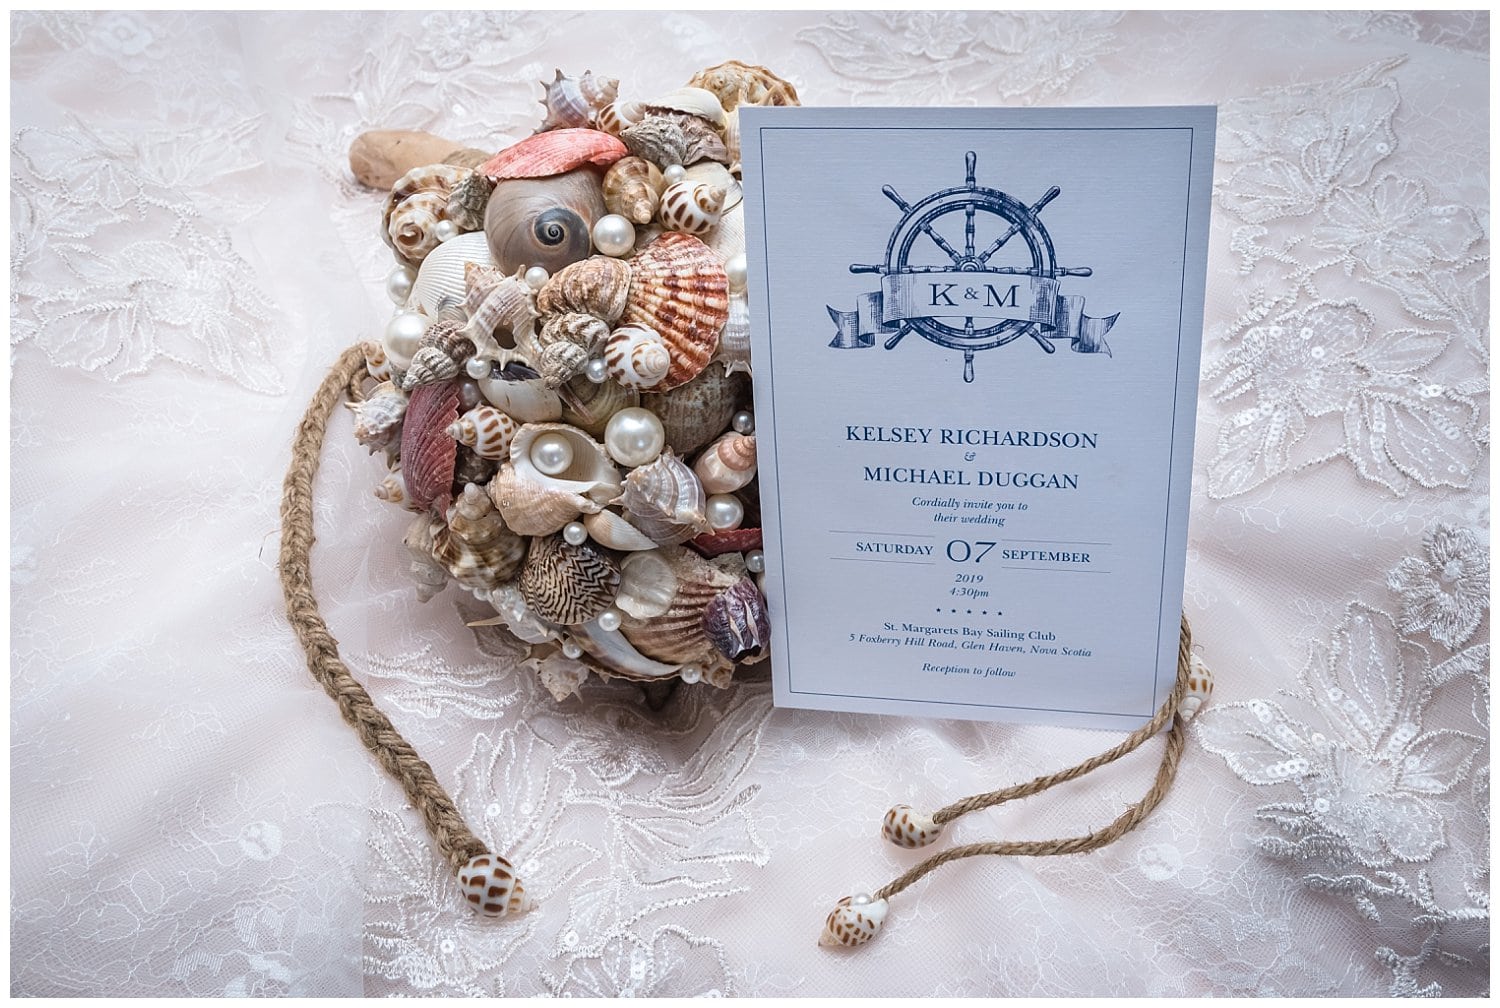 A nautical style wedding invitation for a wedding day on the ocean at Peggys Cove.